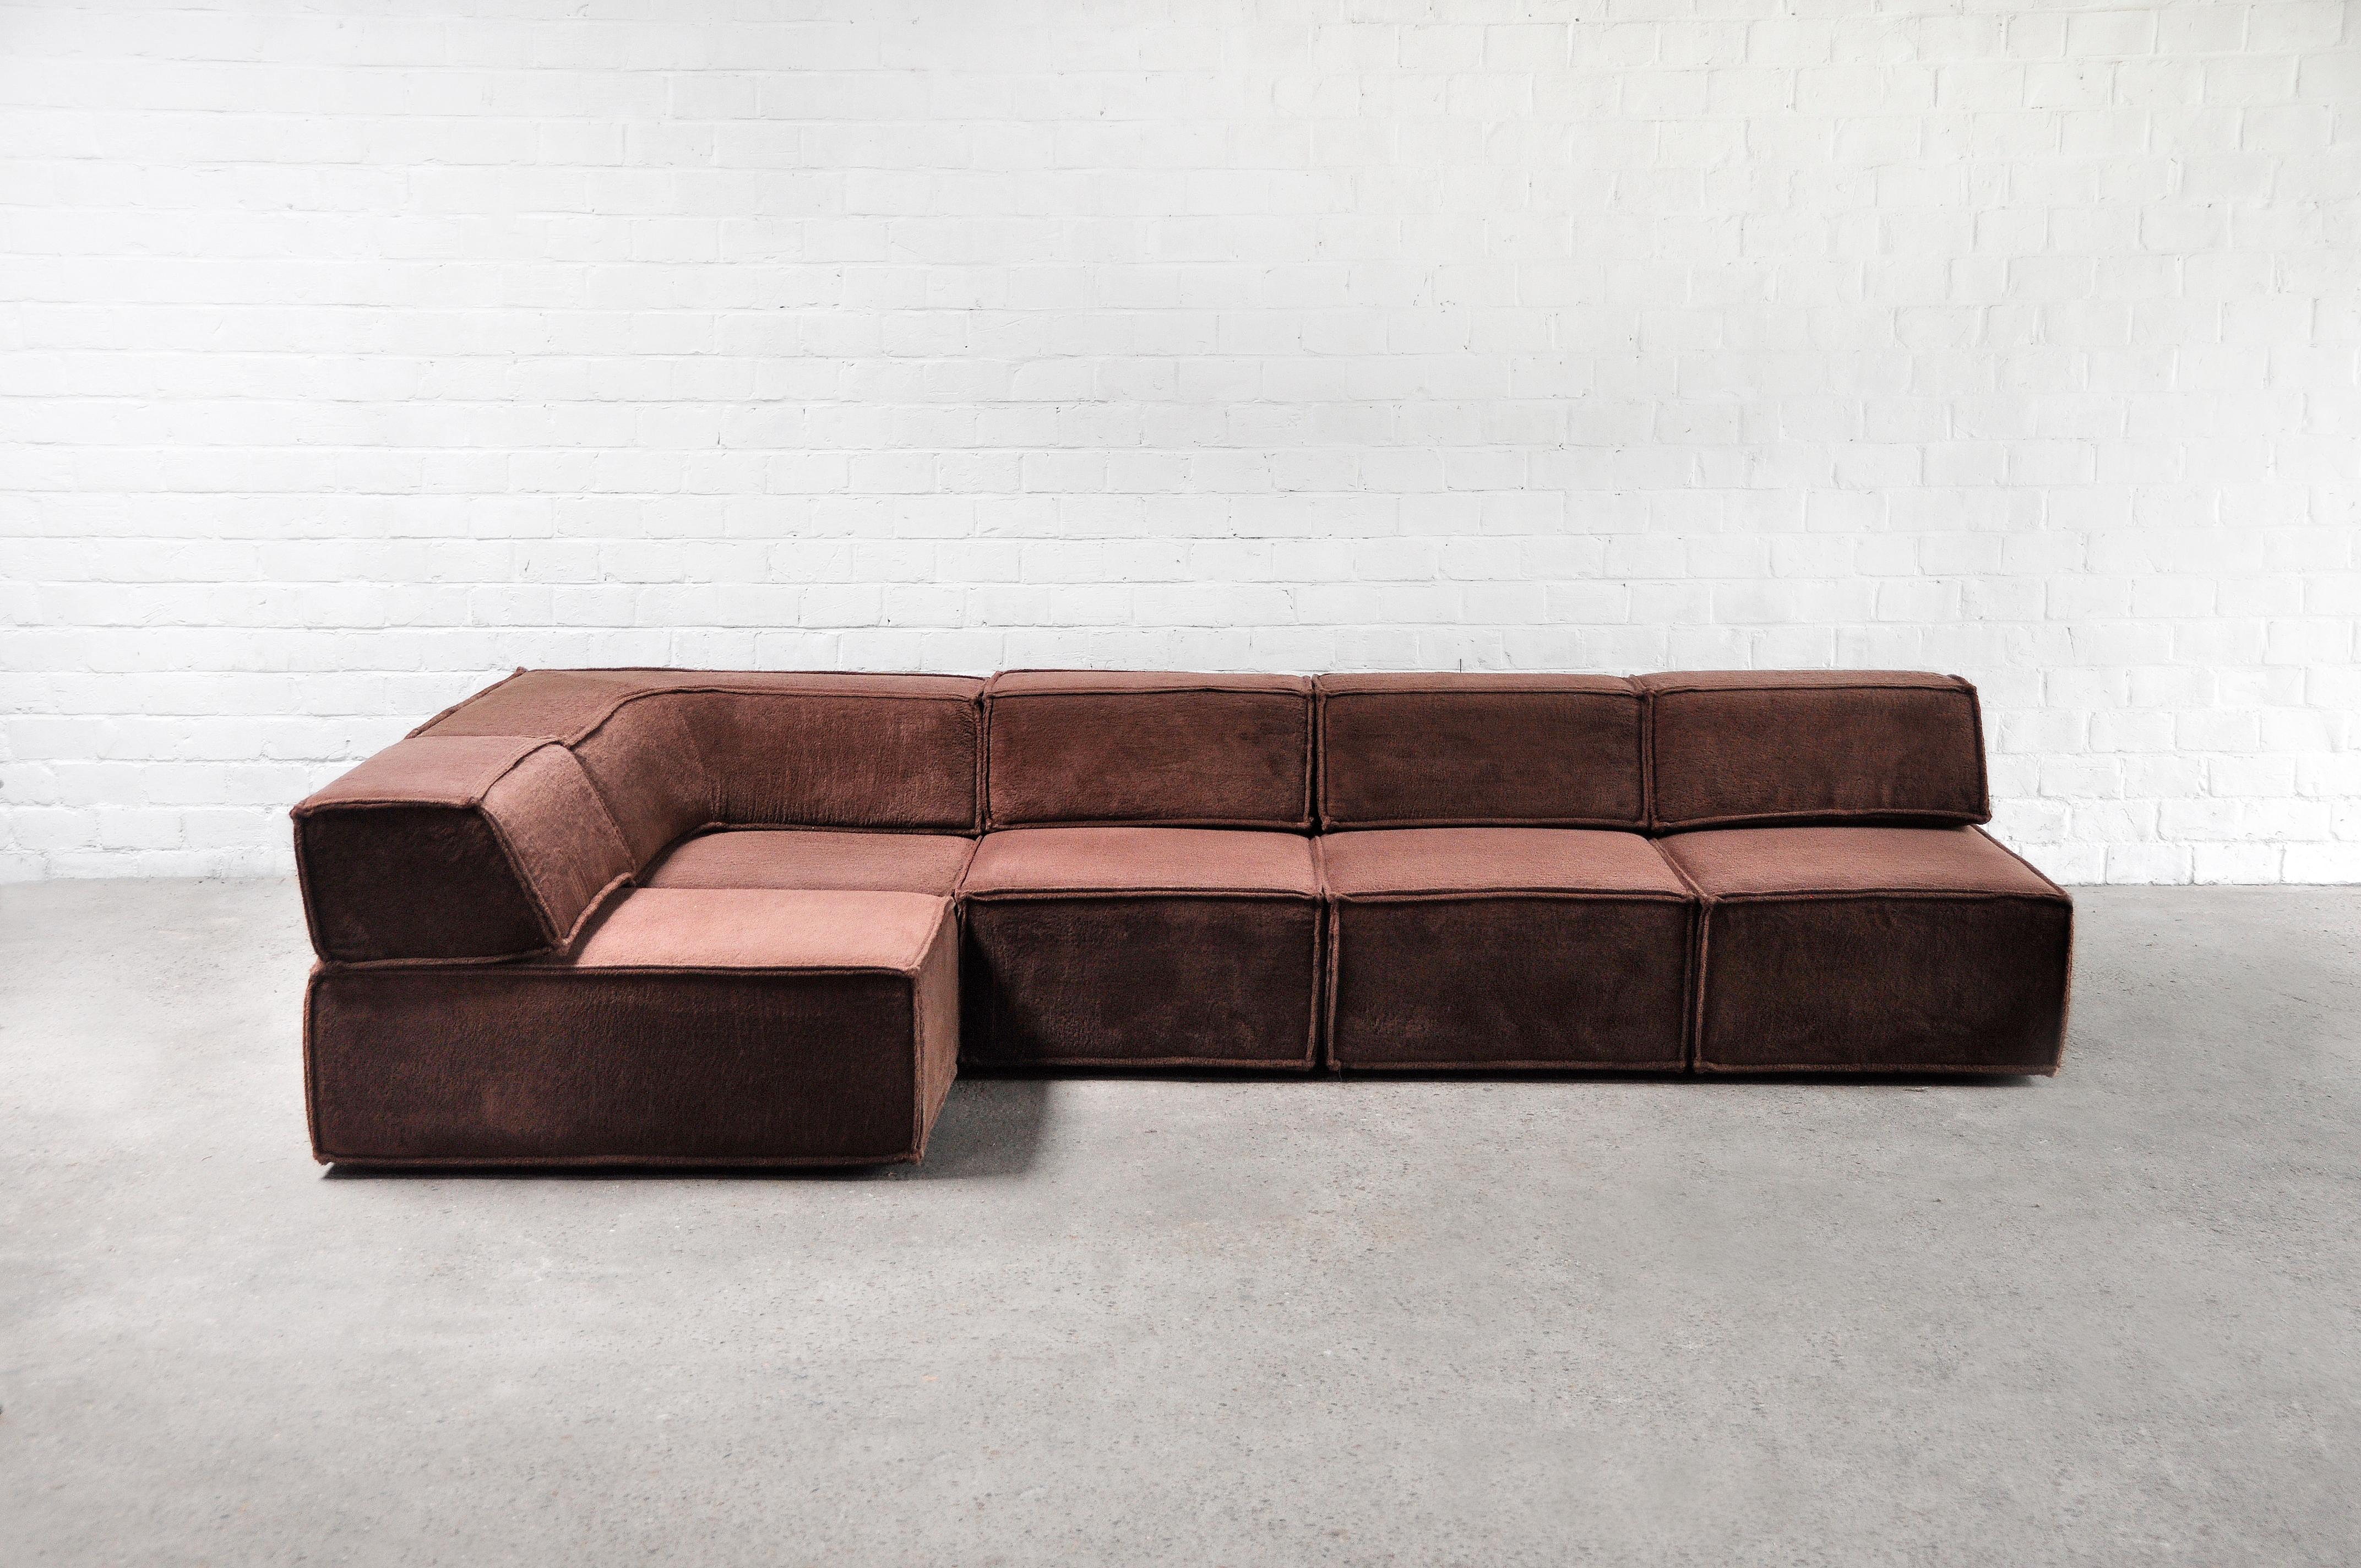 Vintage Cor 'Trio' sofa - modular seating group. This model was designed in 1973 by Franz Hero and Karl Odermatt, Team Form AG, Switzerland. The sofa is covered in its original brown teddy fabric. All modules can be ordered freely, leaving unlimited